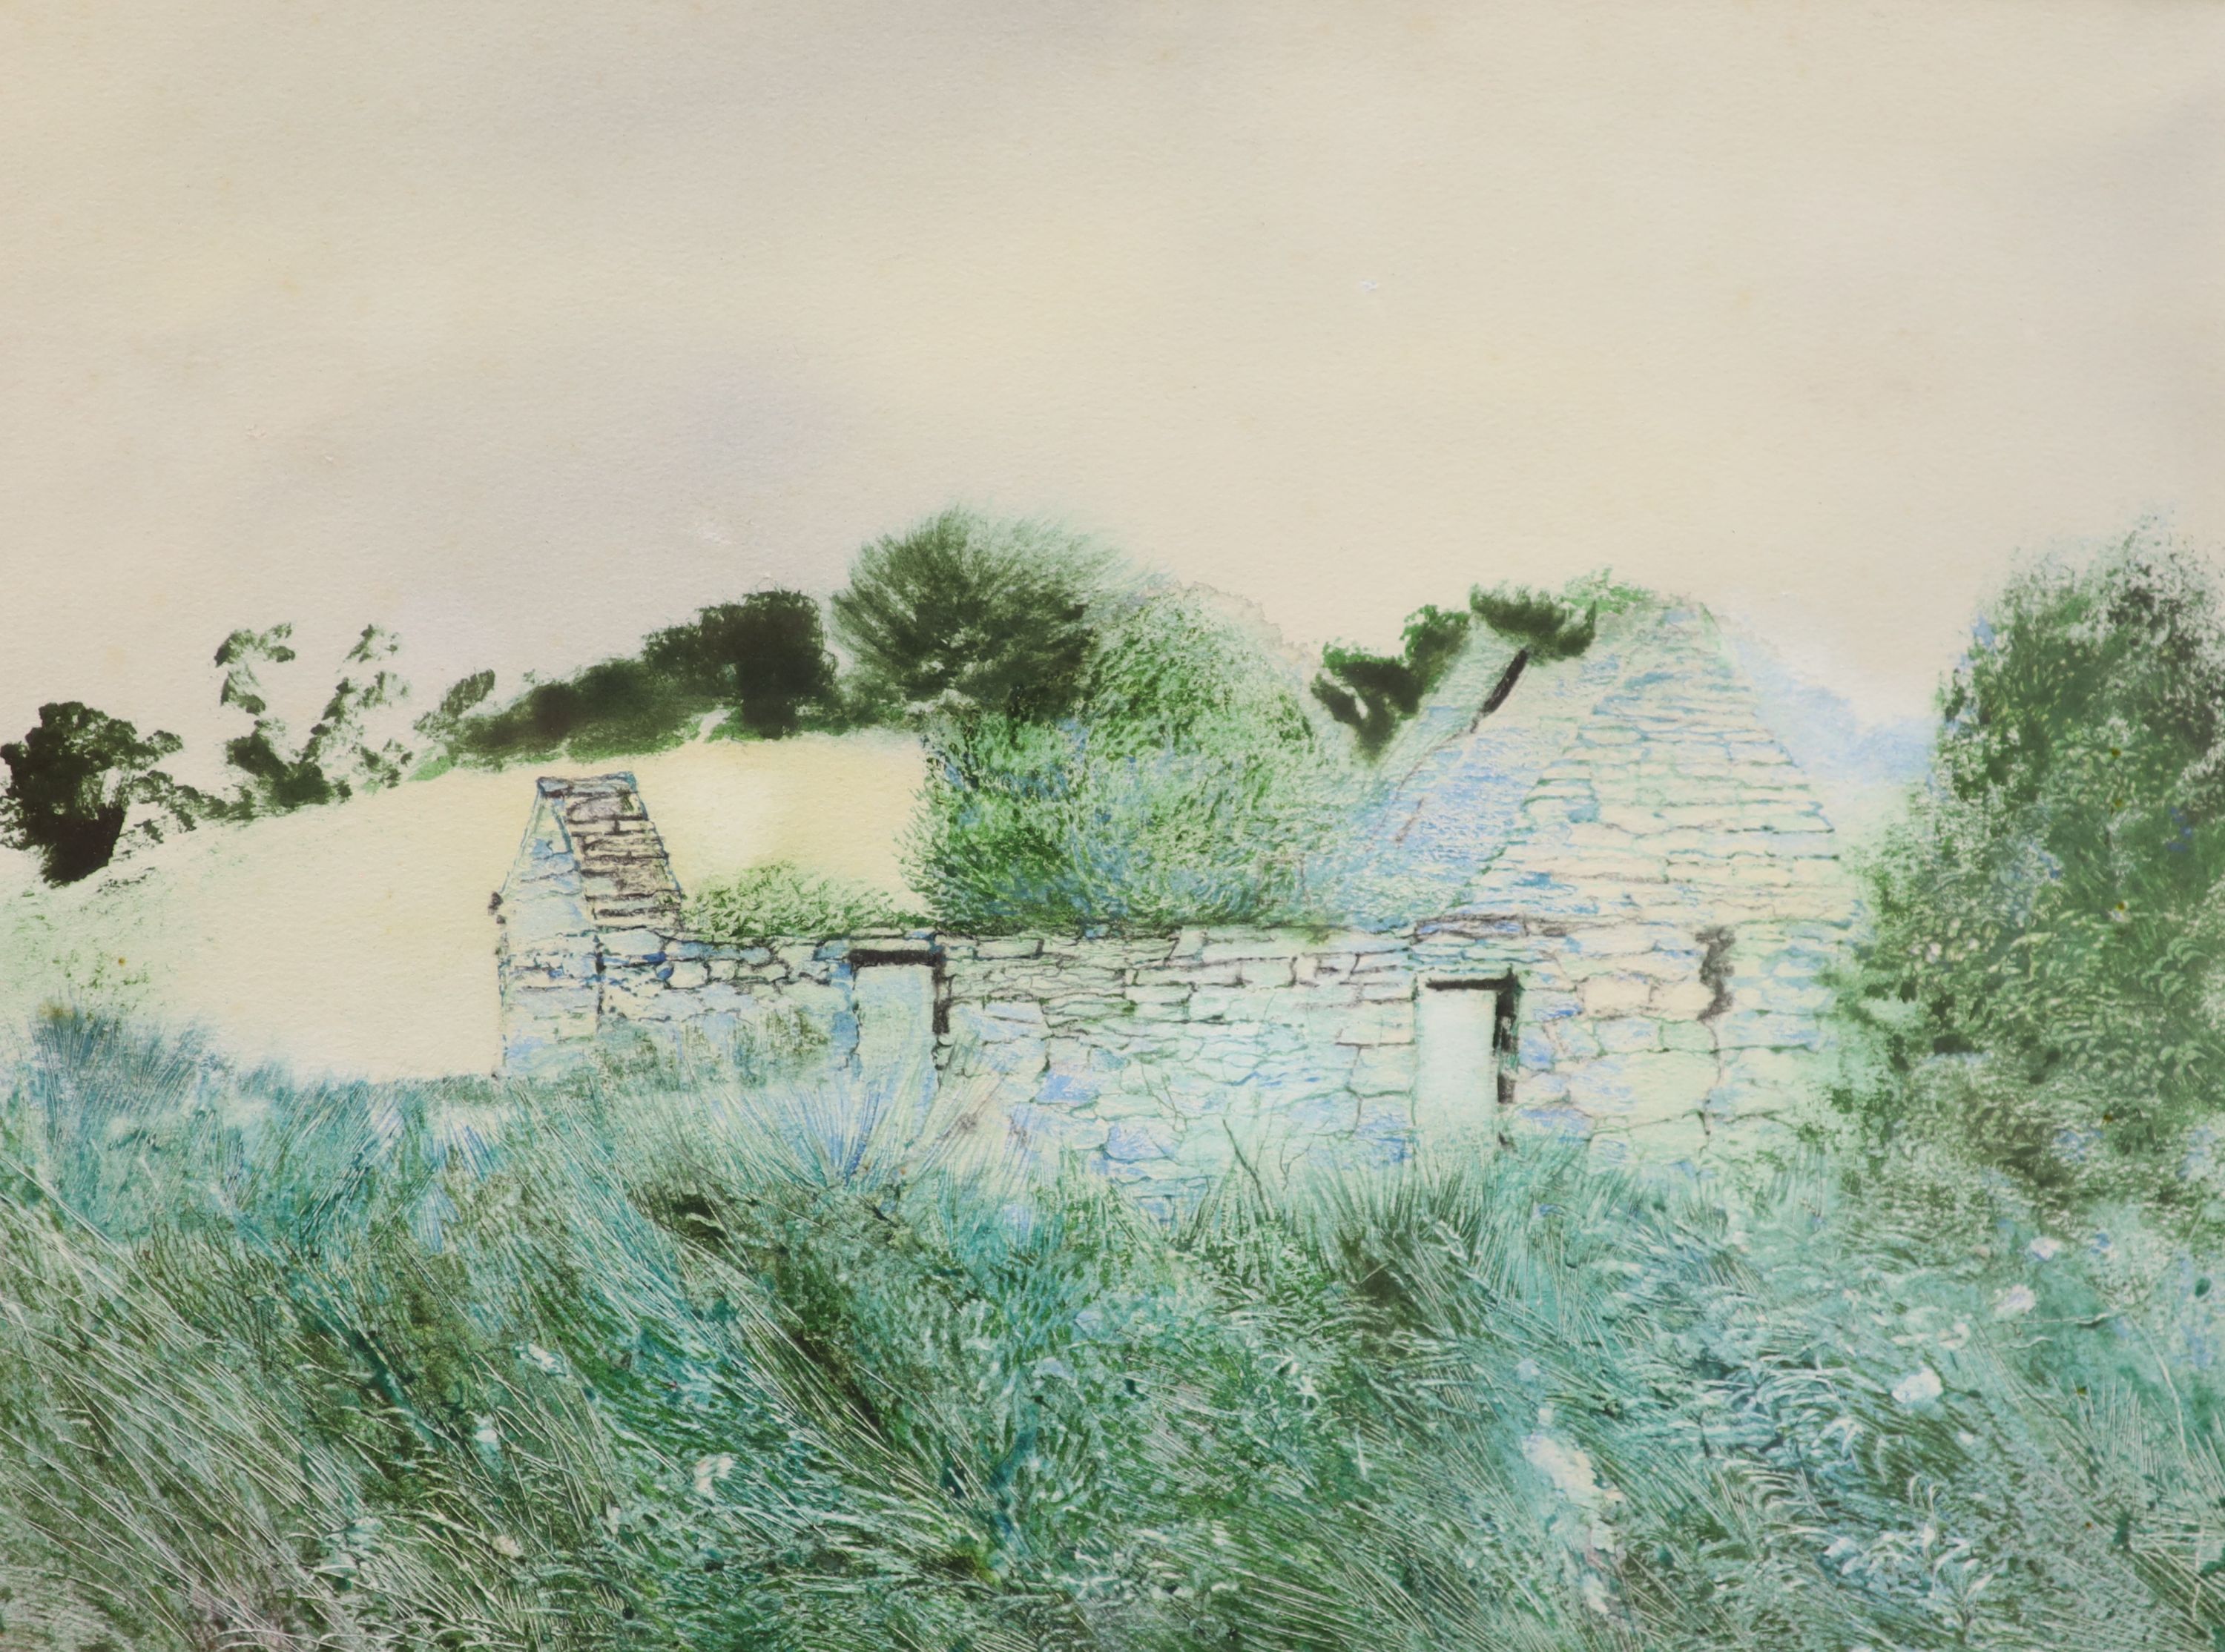 Philip Crenell, mixed media, Ruin at Drummonread, 28 x 37cm, and a Maud Earl print of terriers